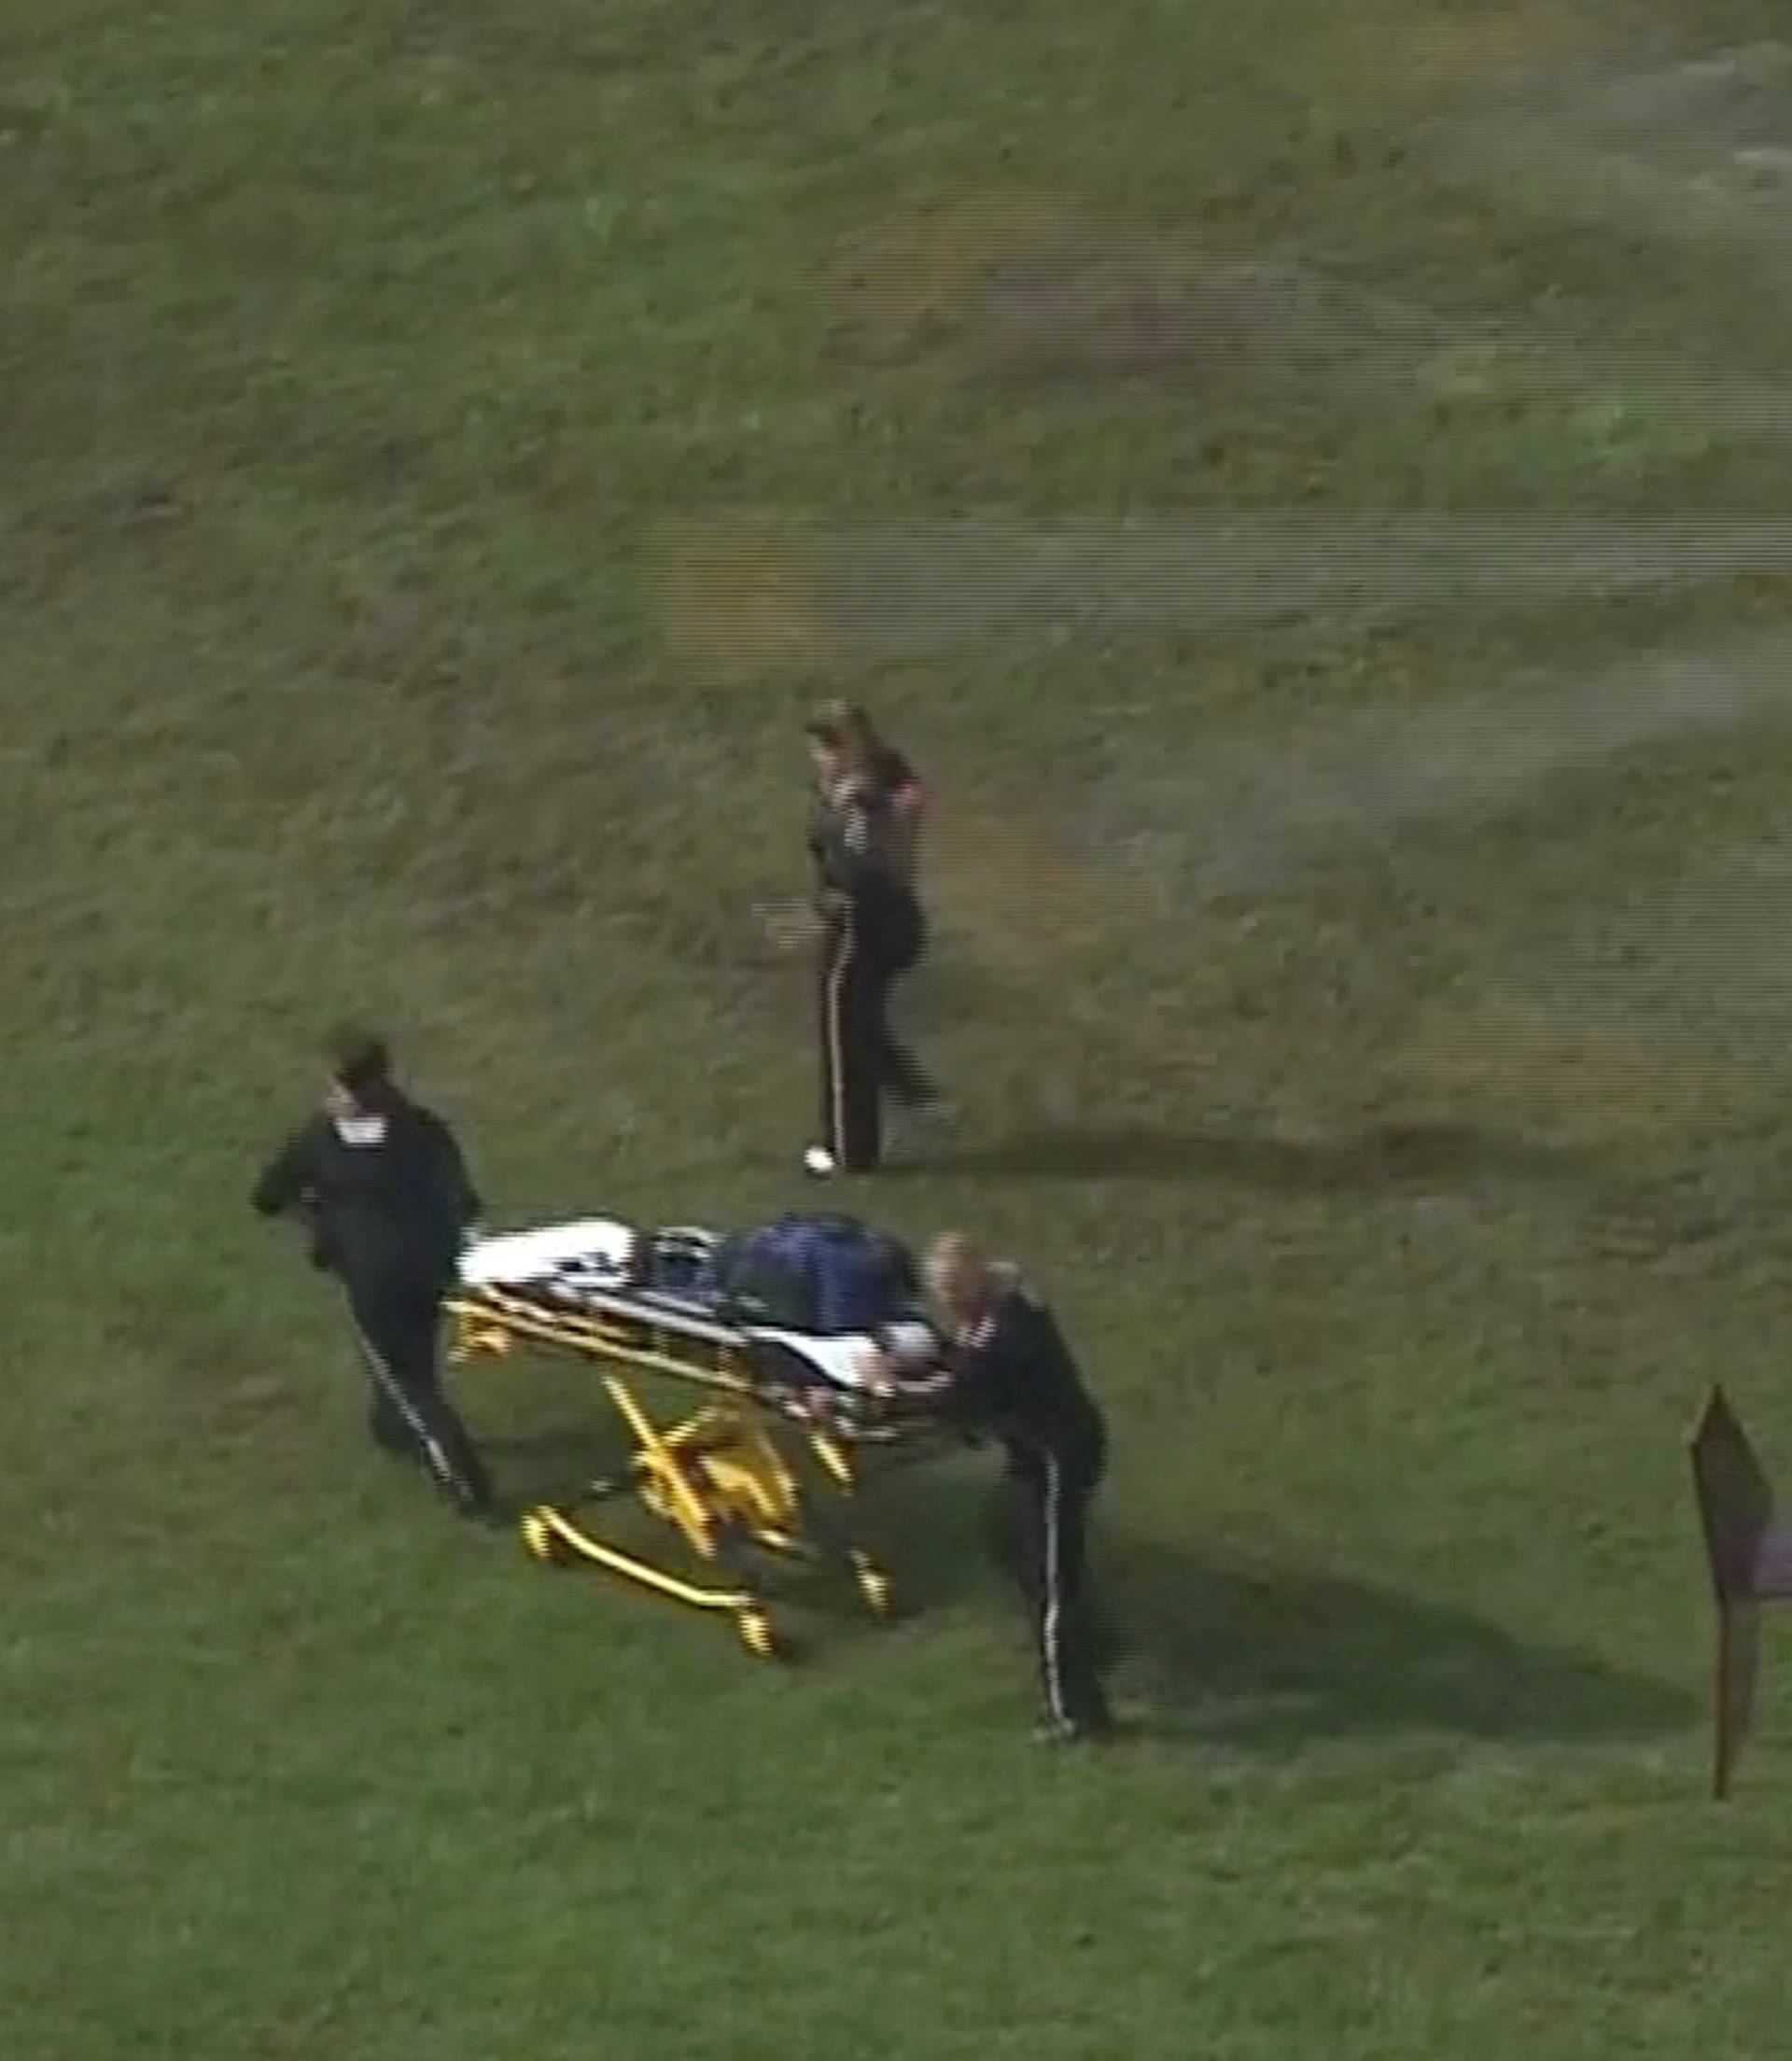 Rescue workers unload a stretcher from a helicopter following a shooting incident at the municipal center in this still image from video in Virginia Beach